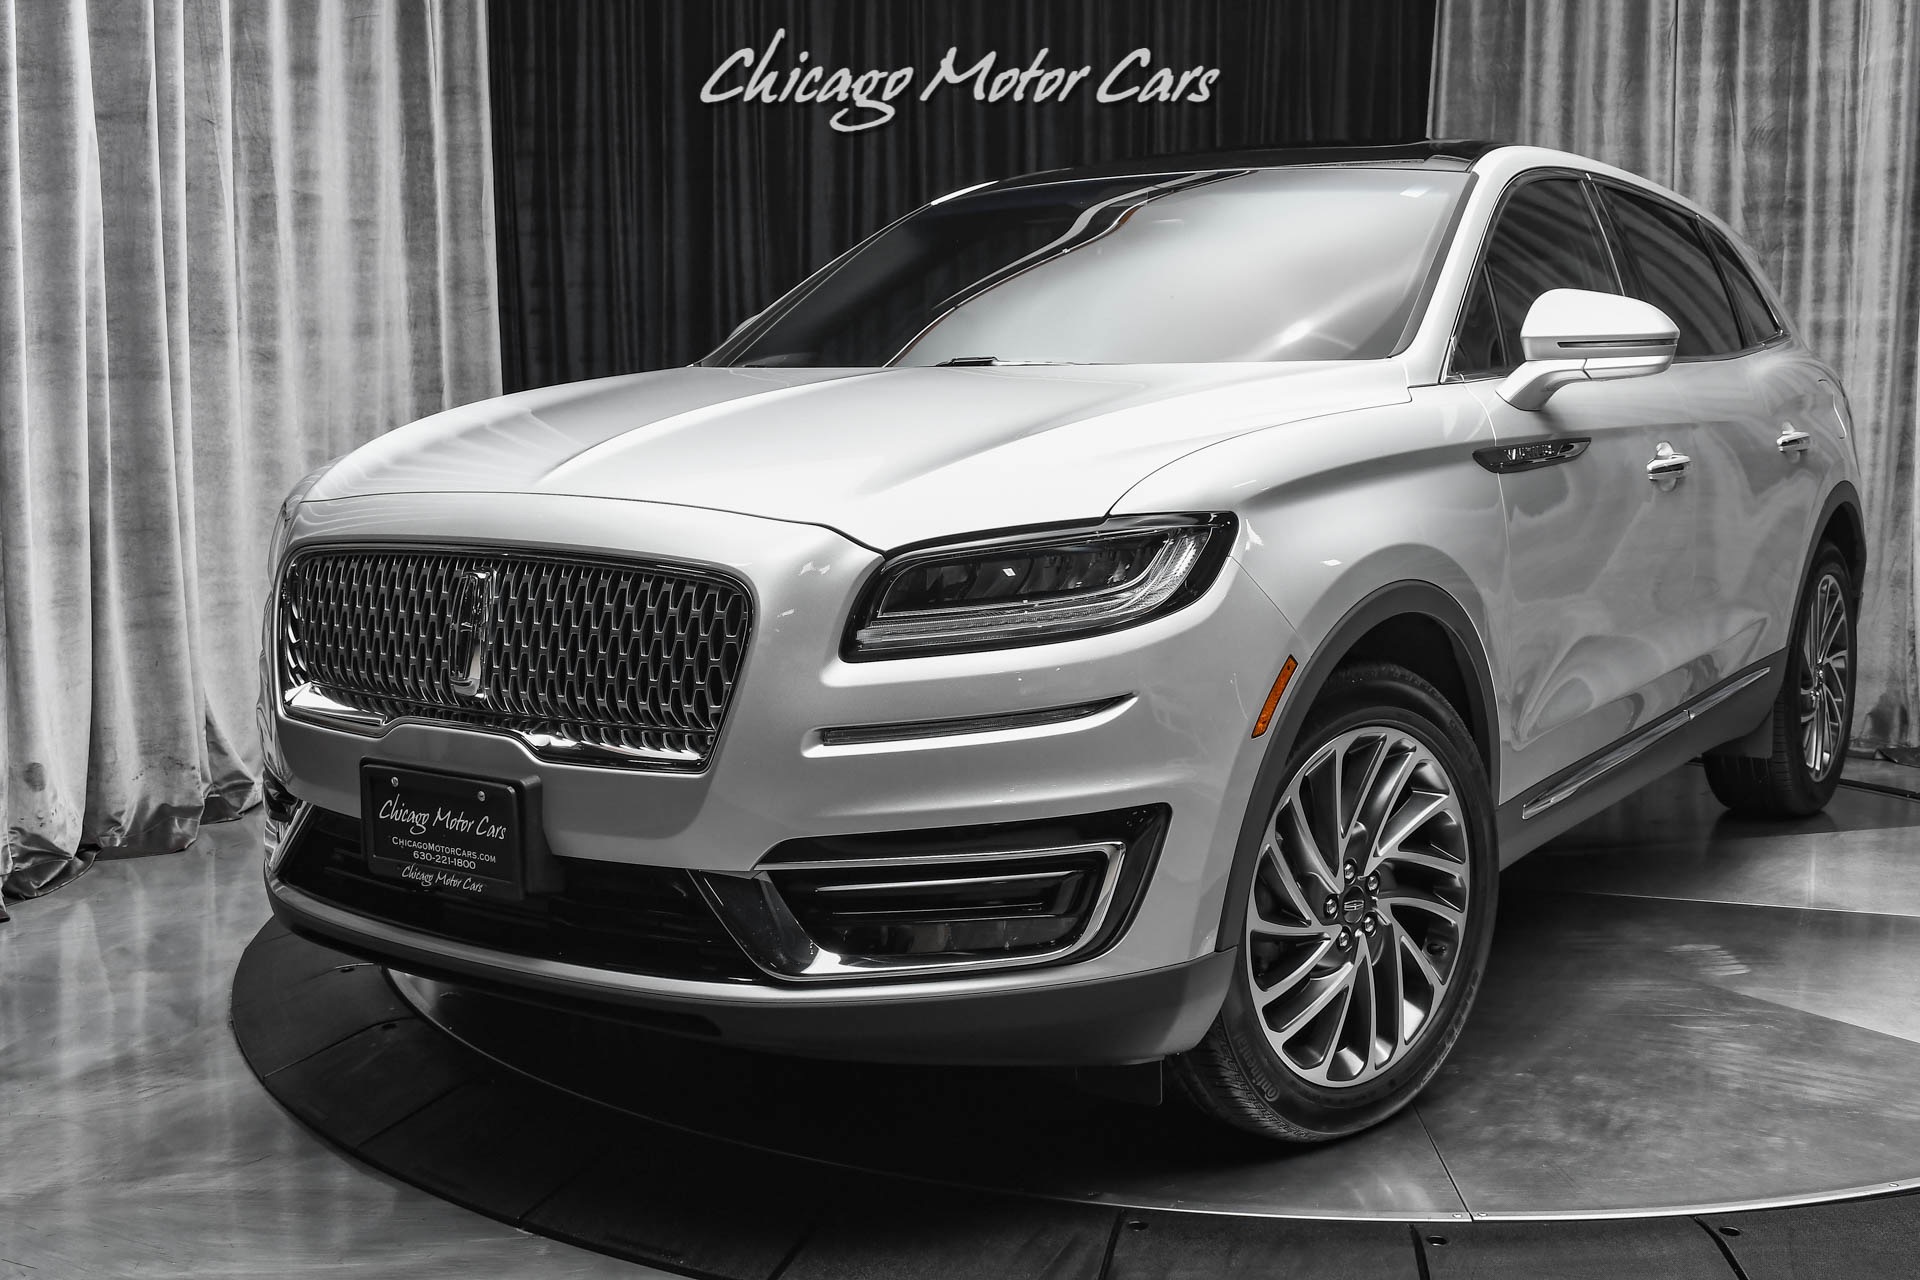 Used-2019-Lincoln-Nautilus-Reserve-52kMSRP-Panoramic-Sunroof-Navigation-Revel-Sound-System